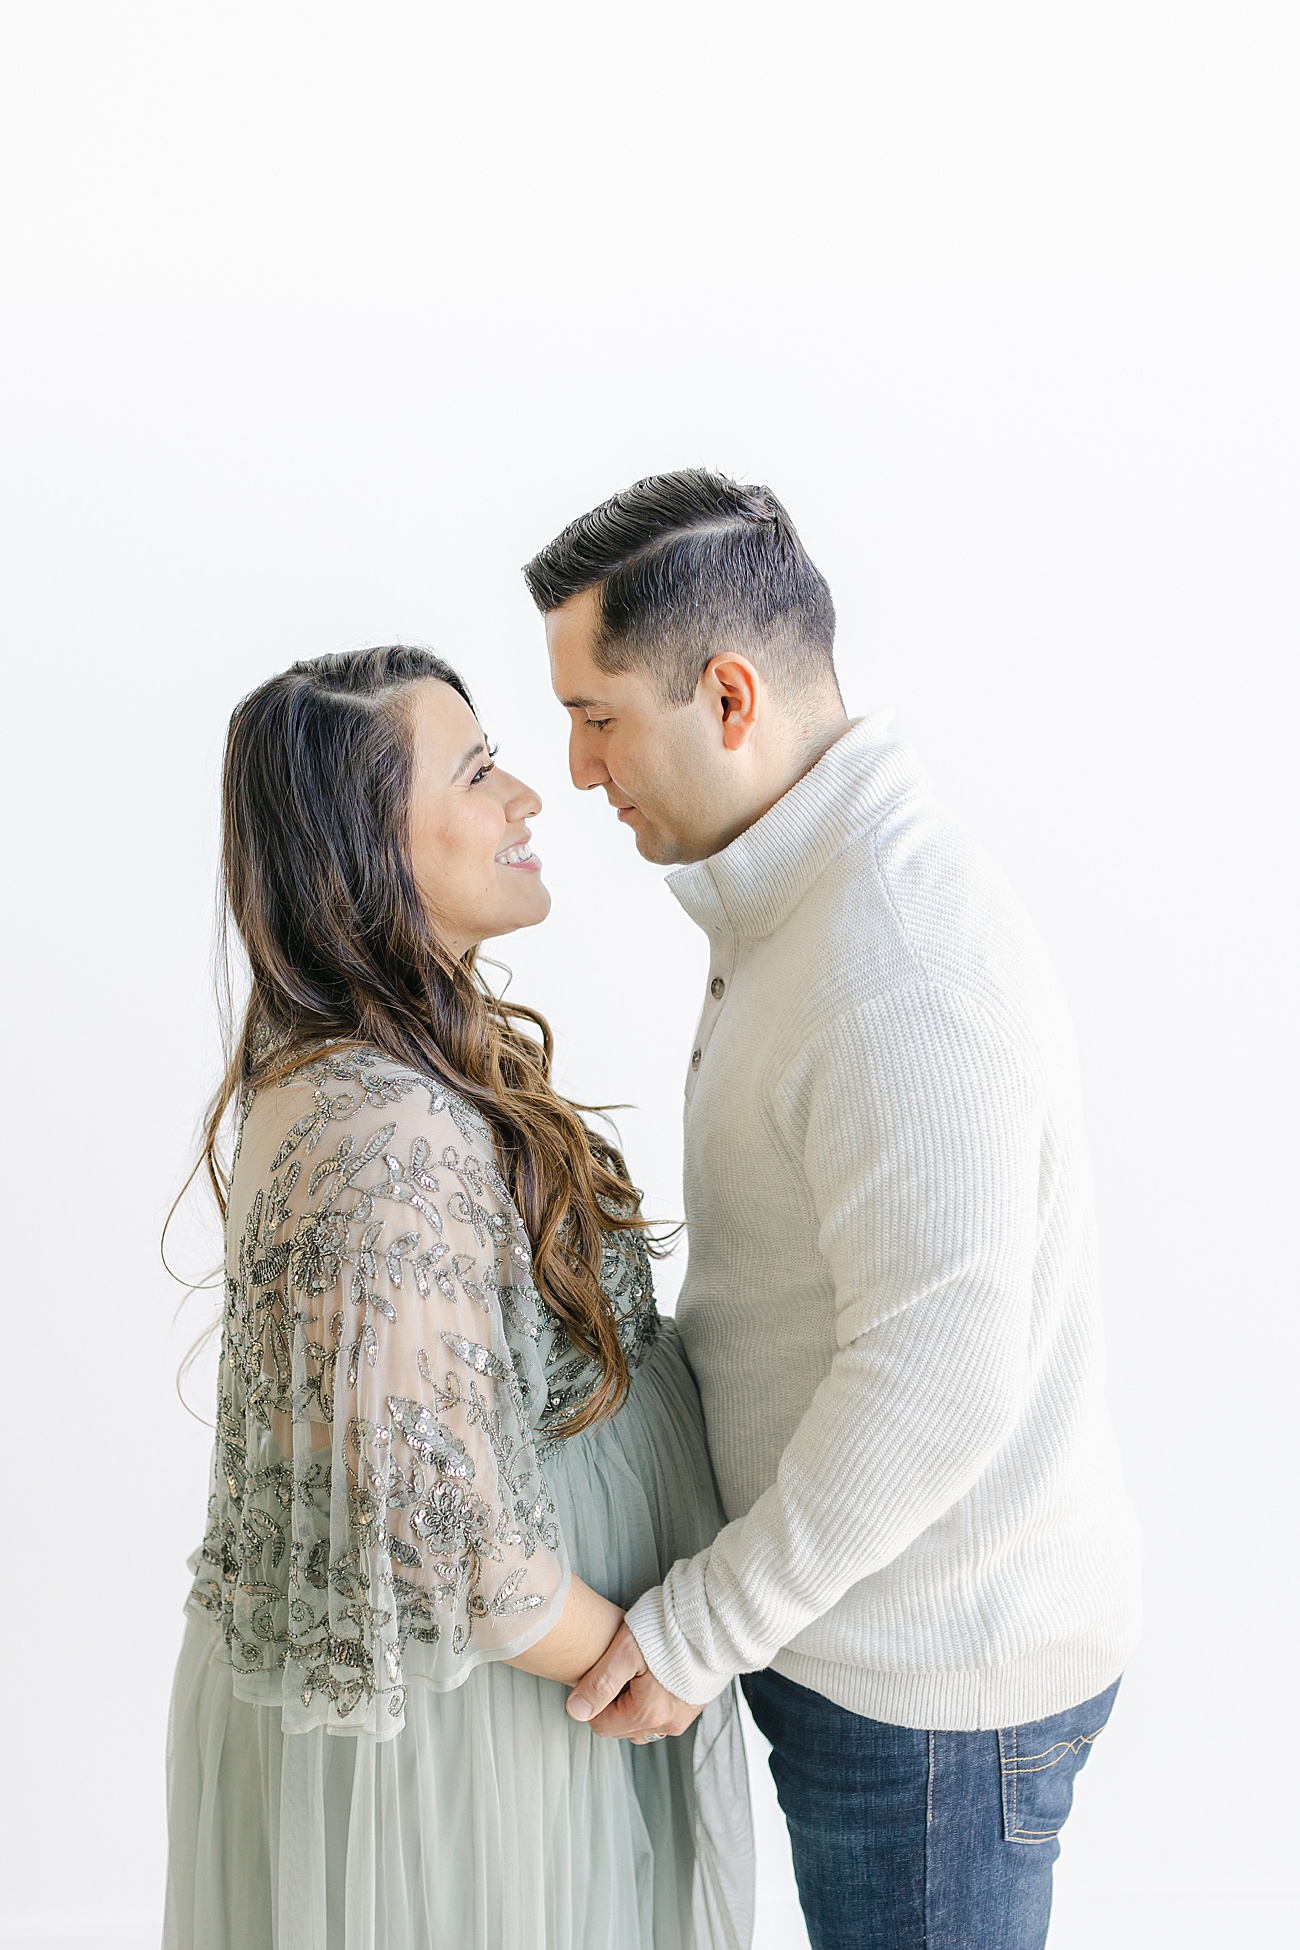 Sweet image of Mom and Dad embracing baby bump during maternity photoshoot in Austin, TX. Photo by Sana Ahmed Photography.